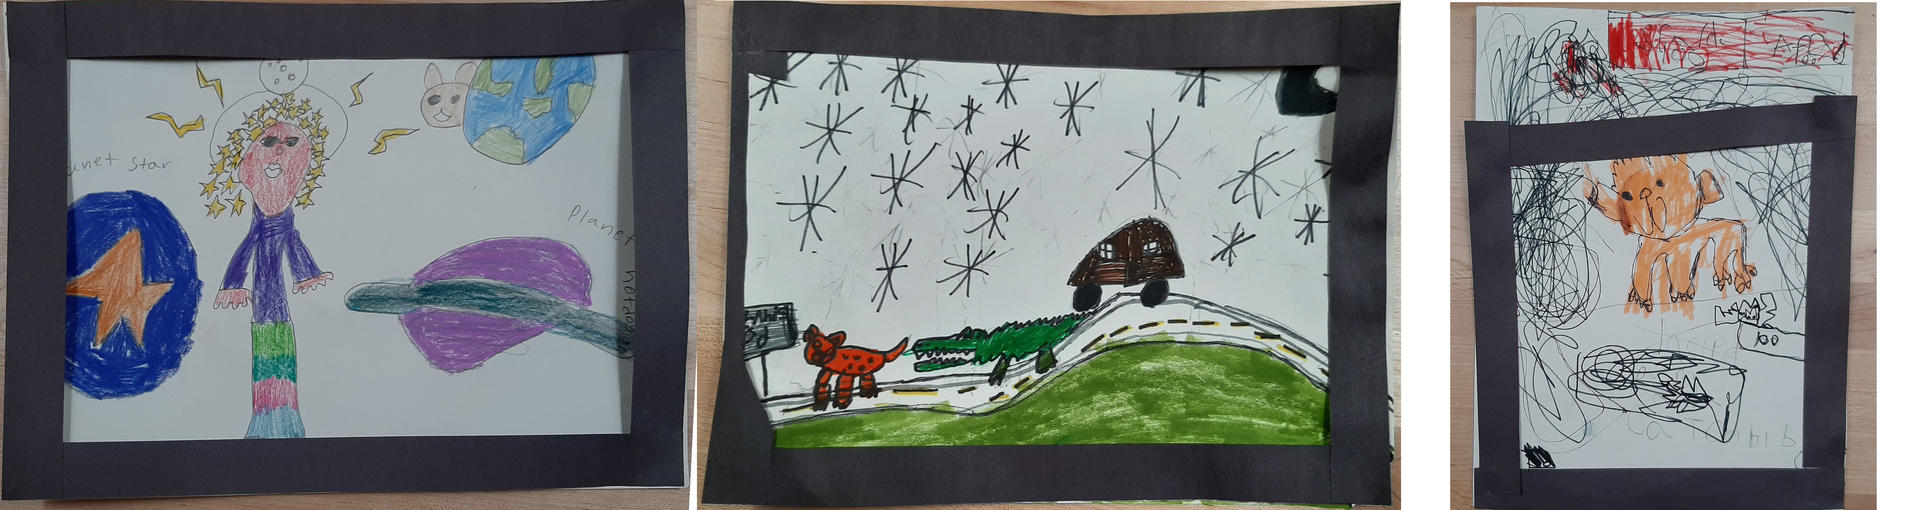 First Graders were introduced to Surrealism and how it can be used to draw/interpret dreams. They then created their own surrealist dream drawings. There were some students who struggled to remember their dreams could still experiment with creating surrealist drawings.